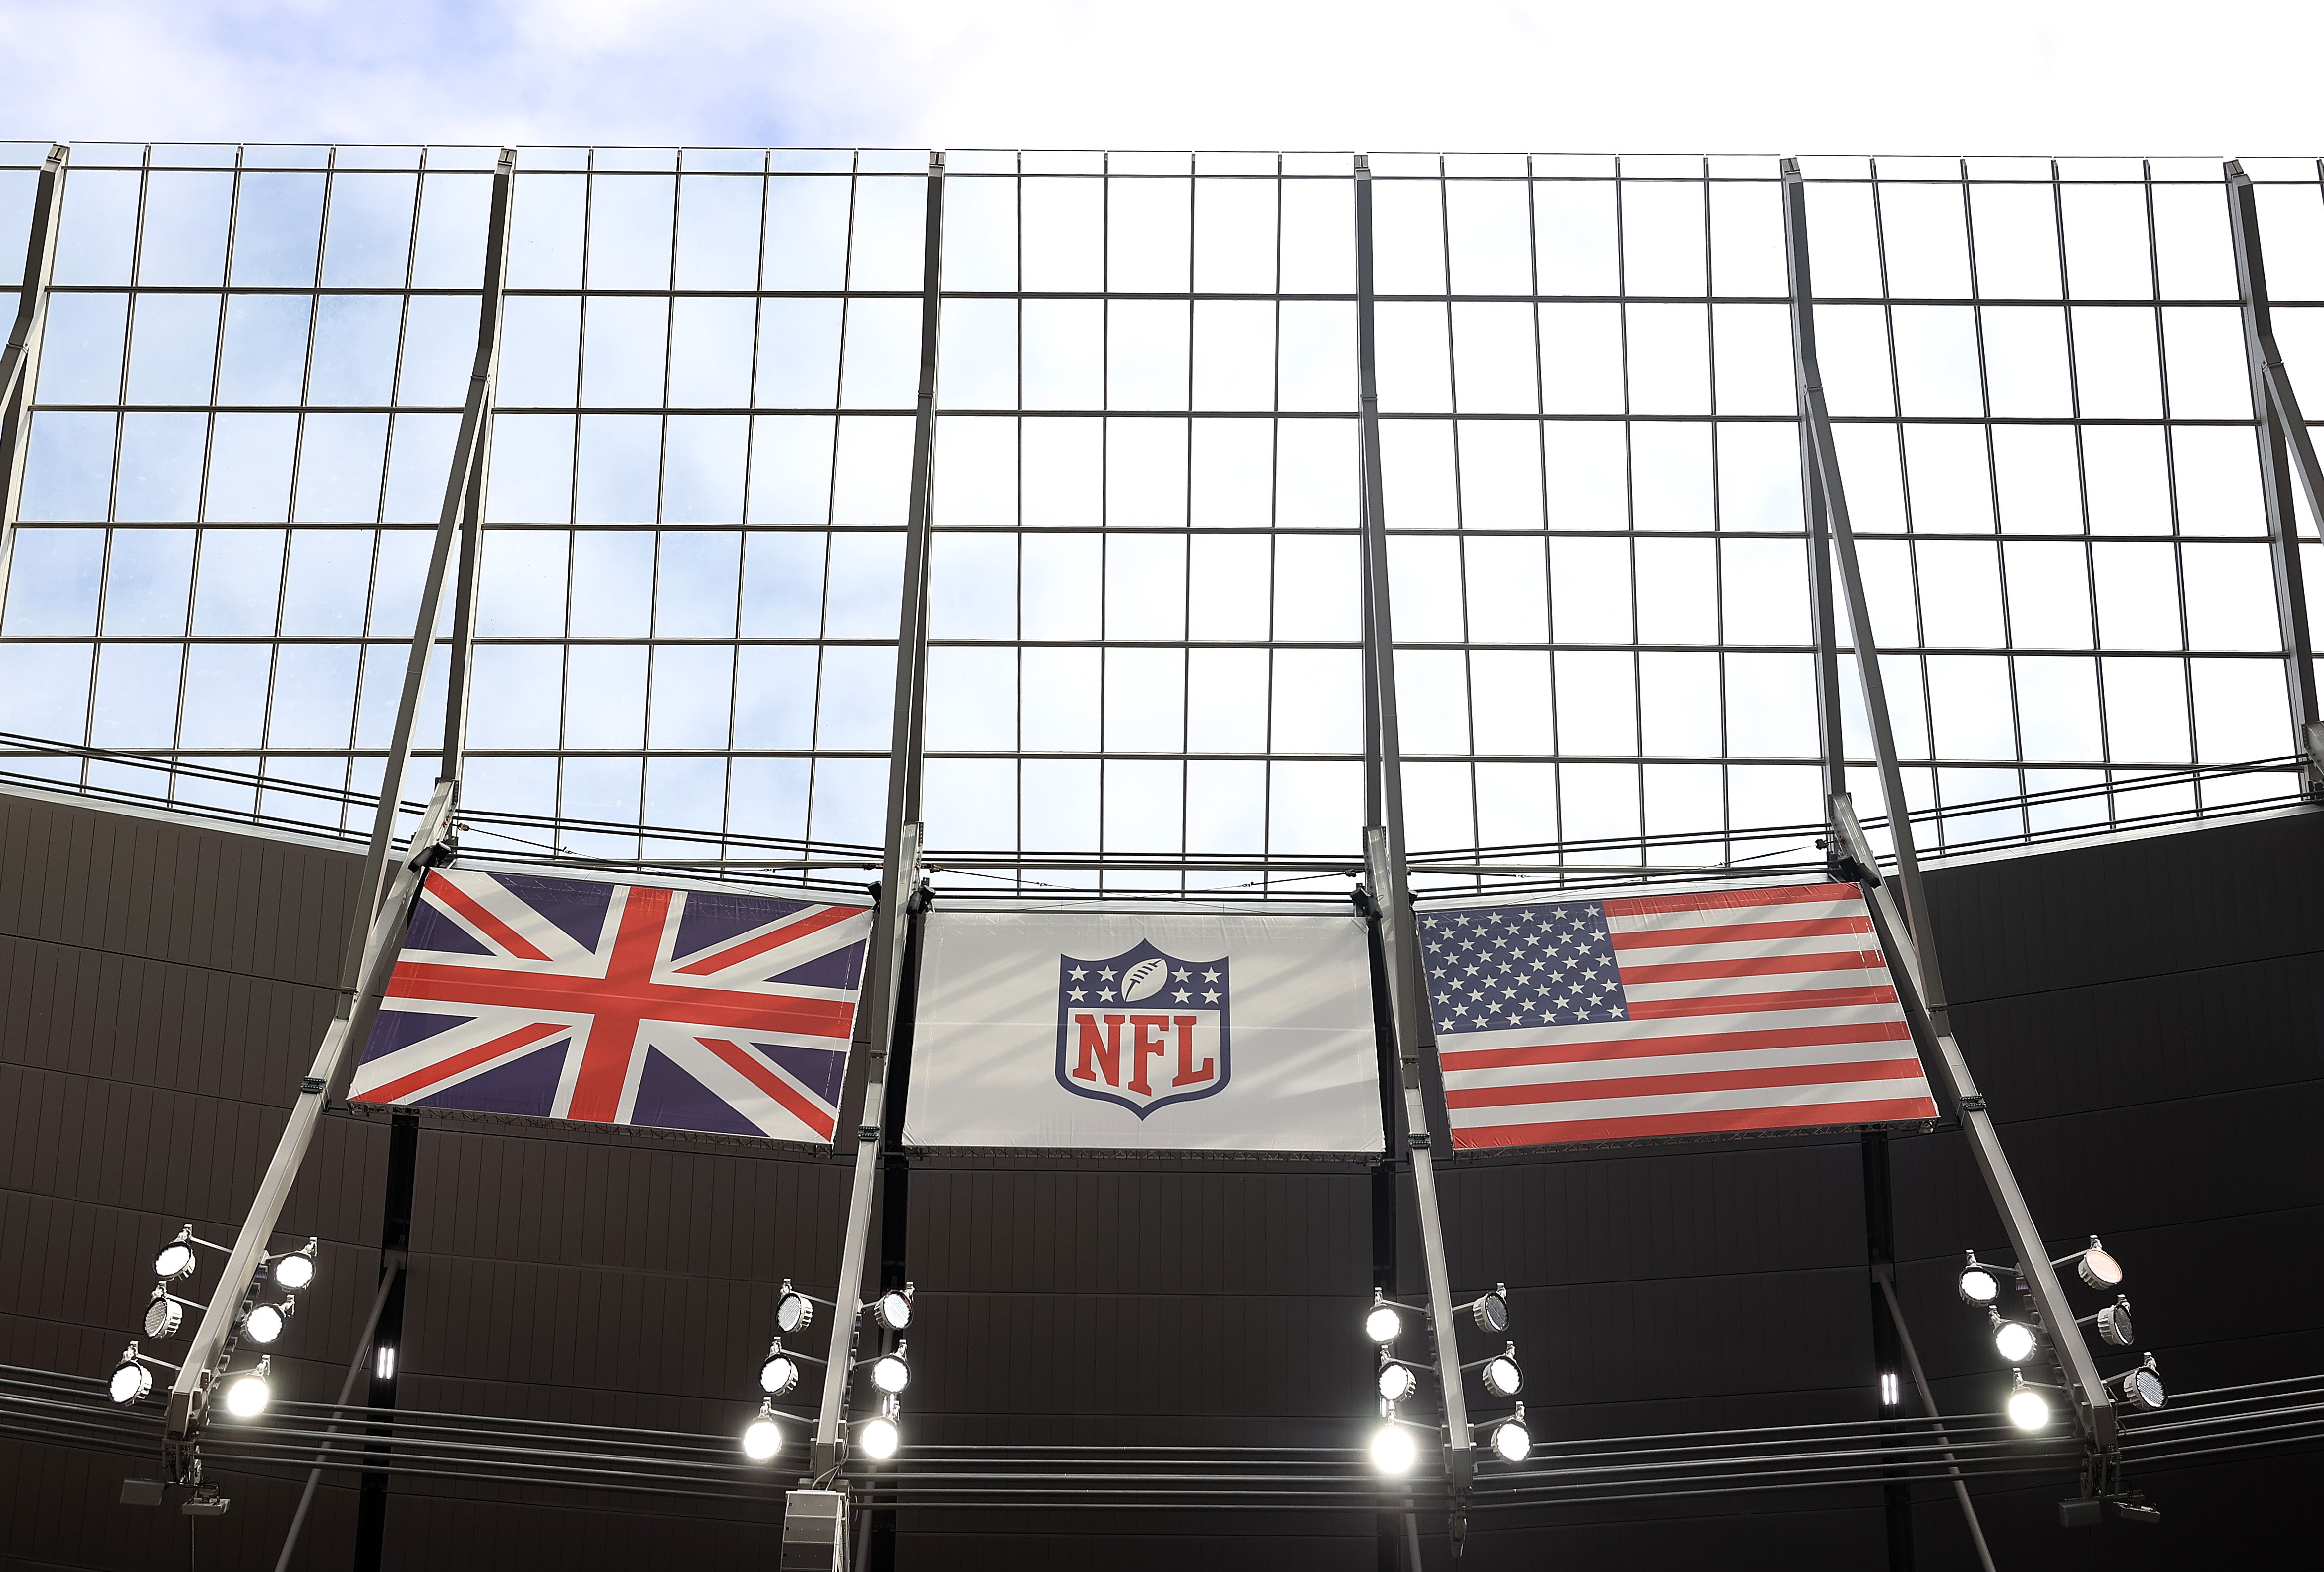 A London NFL franchise has been talked about with increased interest in recent years